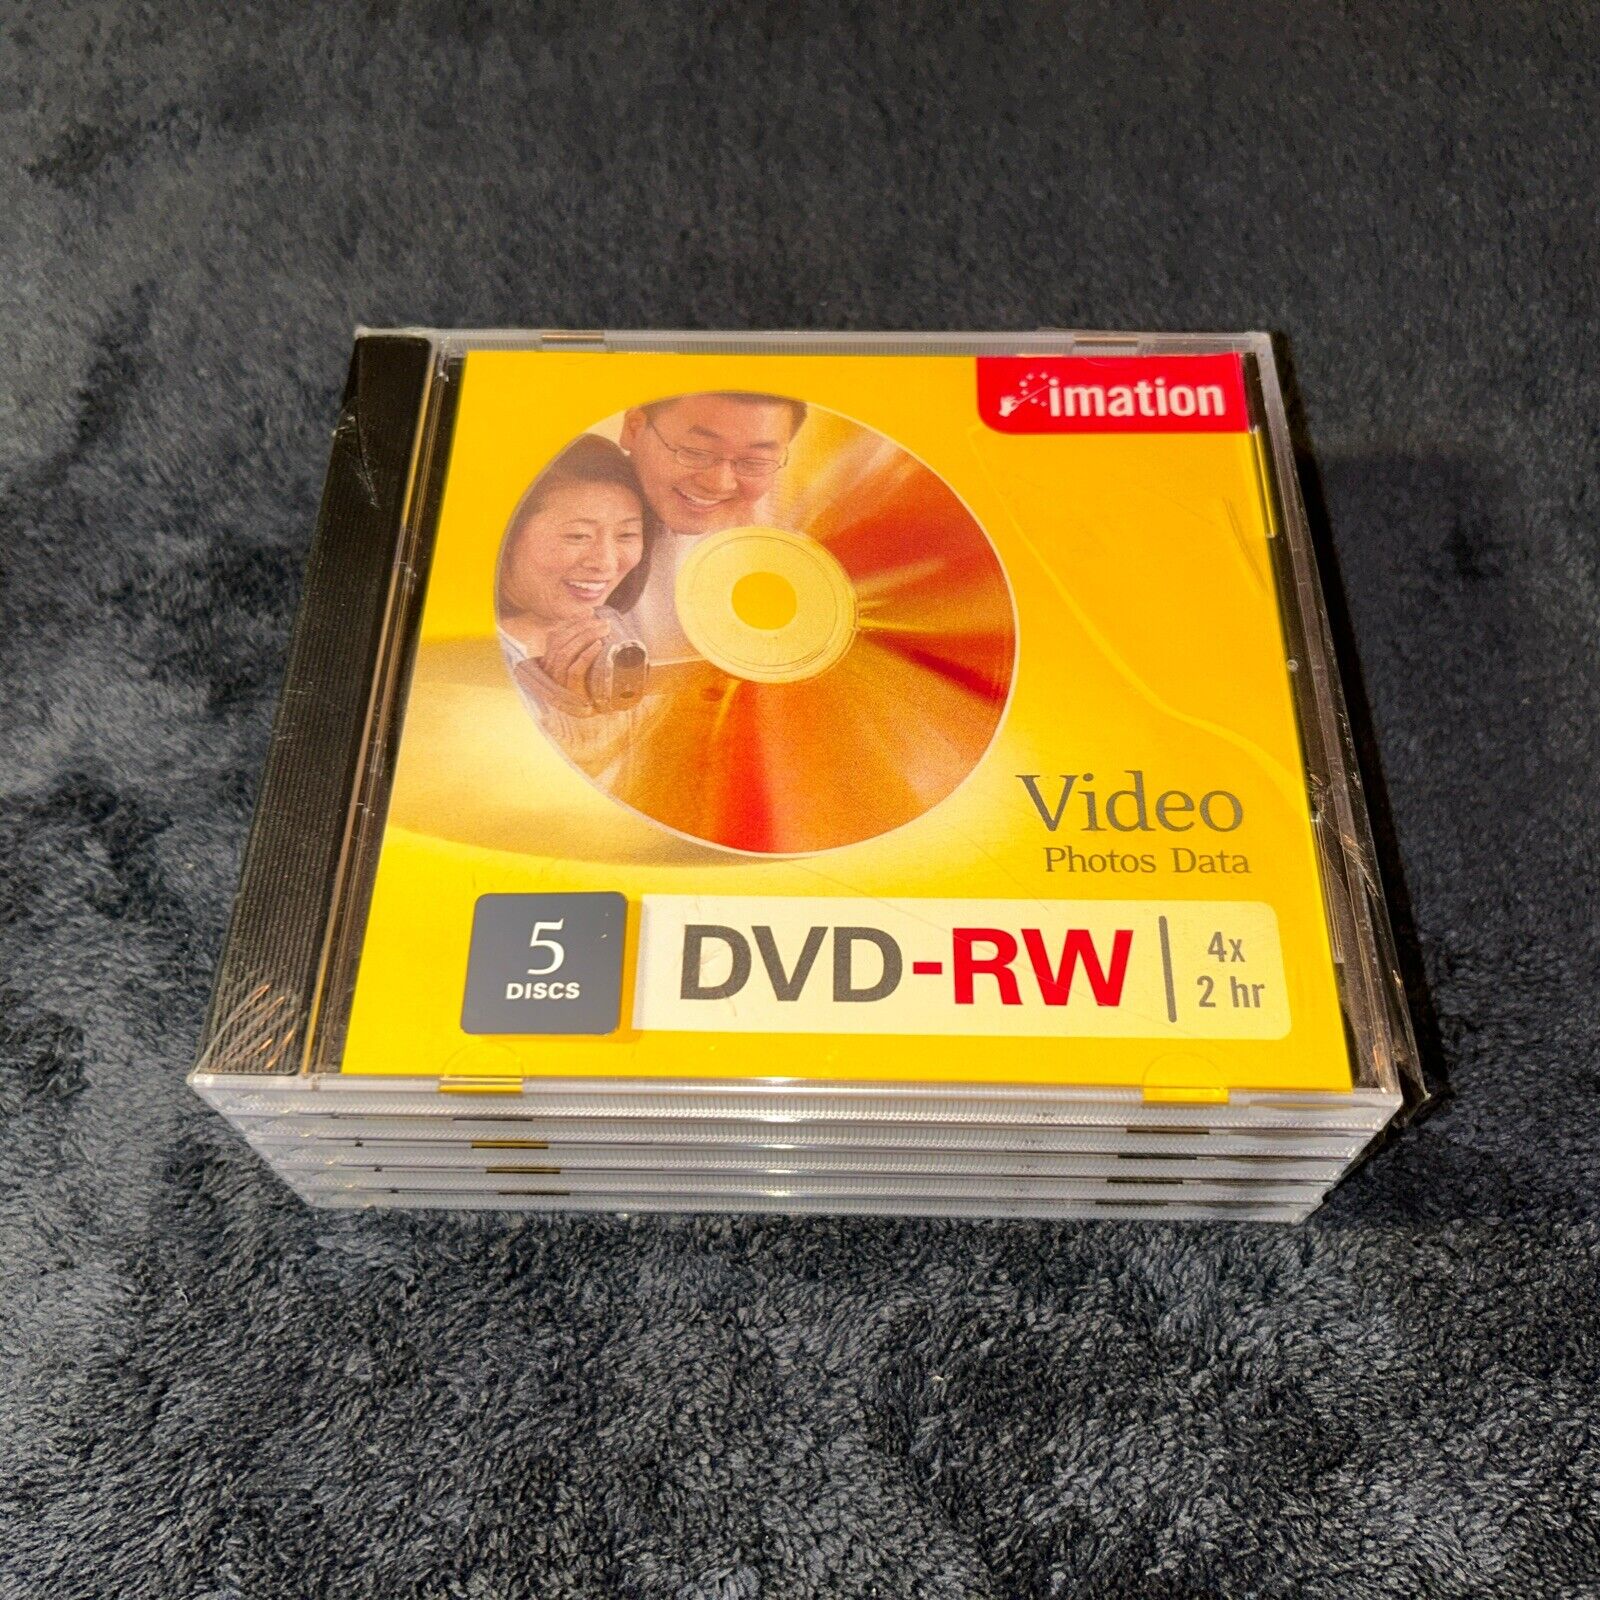 DVD-RW New Sealed Imation Video Data 4x 2 HR (5-Pack Jewel Cases)